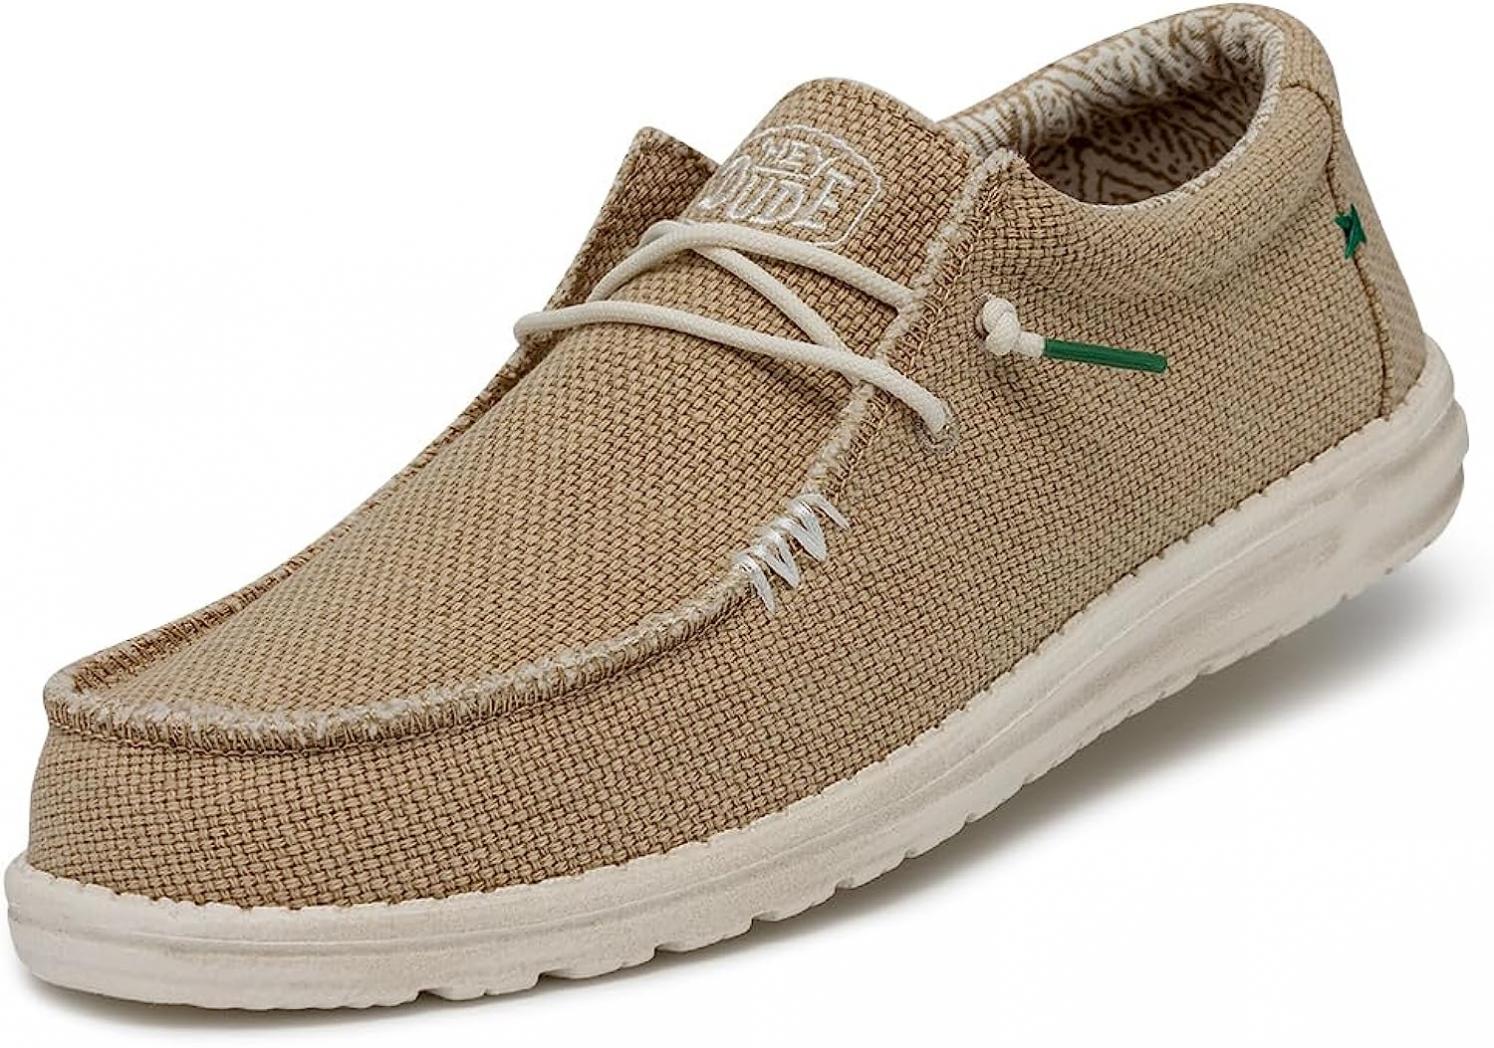 Hey Dude Men's Wally Stitch | Men's Loafers | Men's Slip On Shoes | Comfortable & Light-Weight